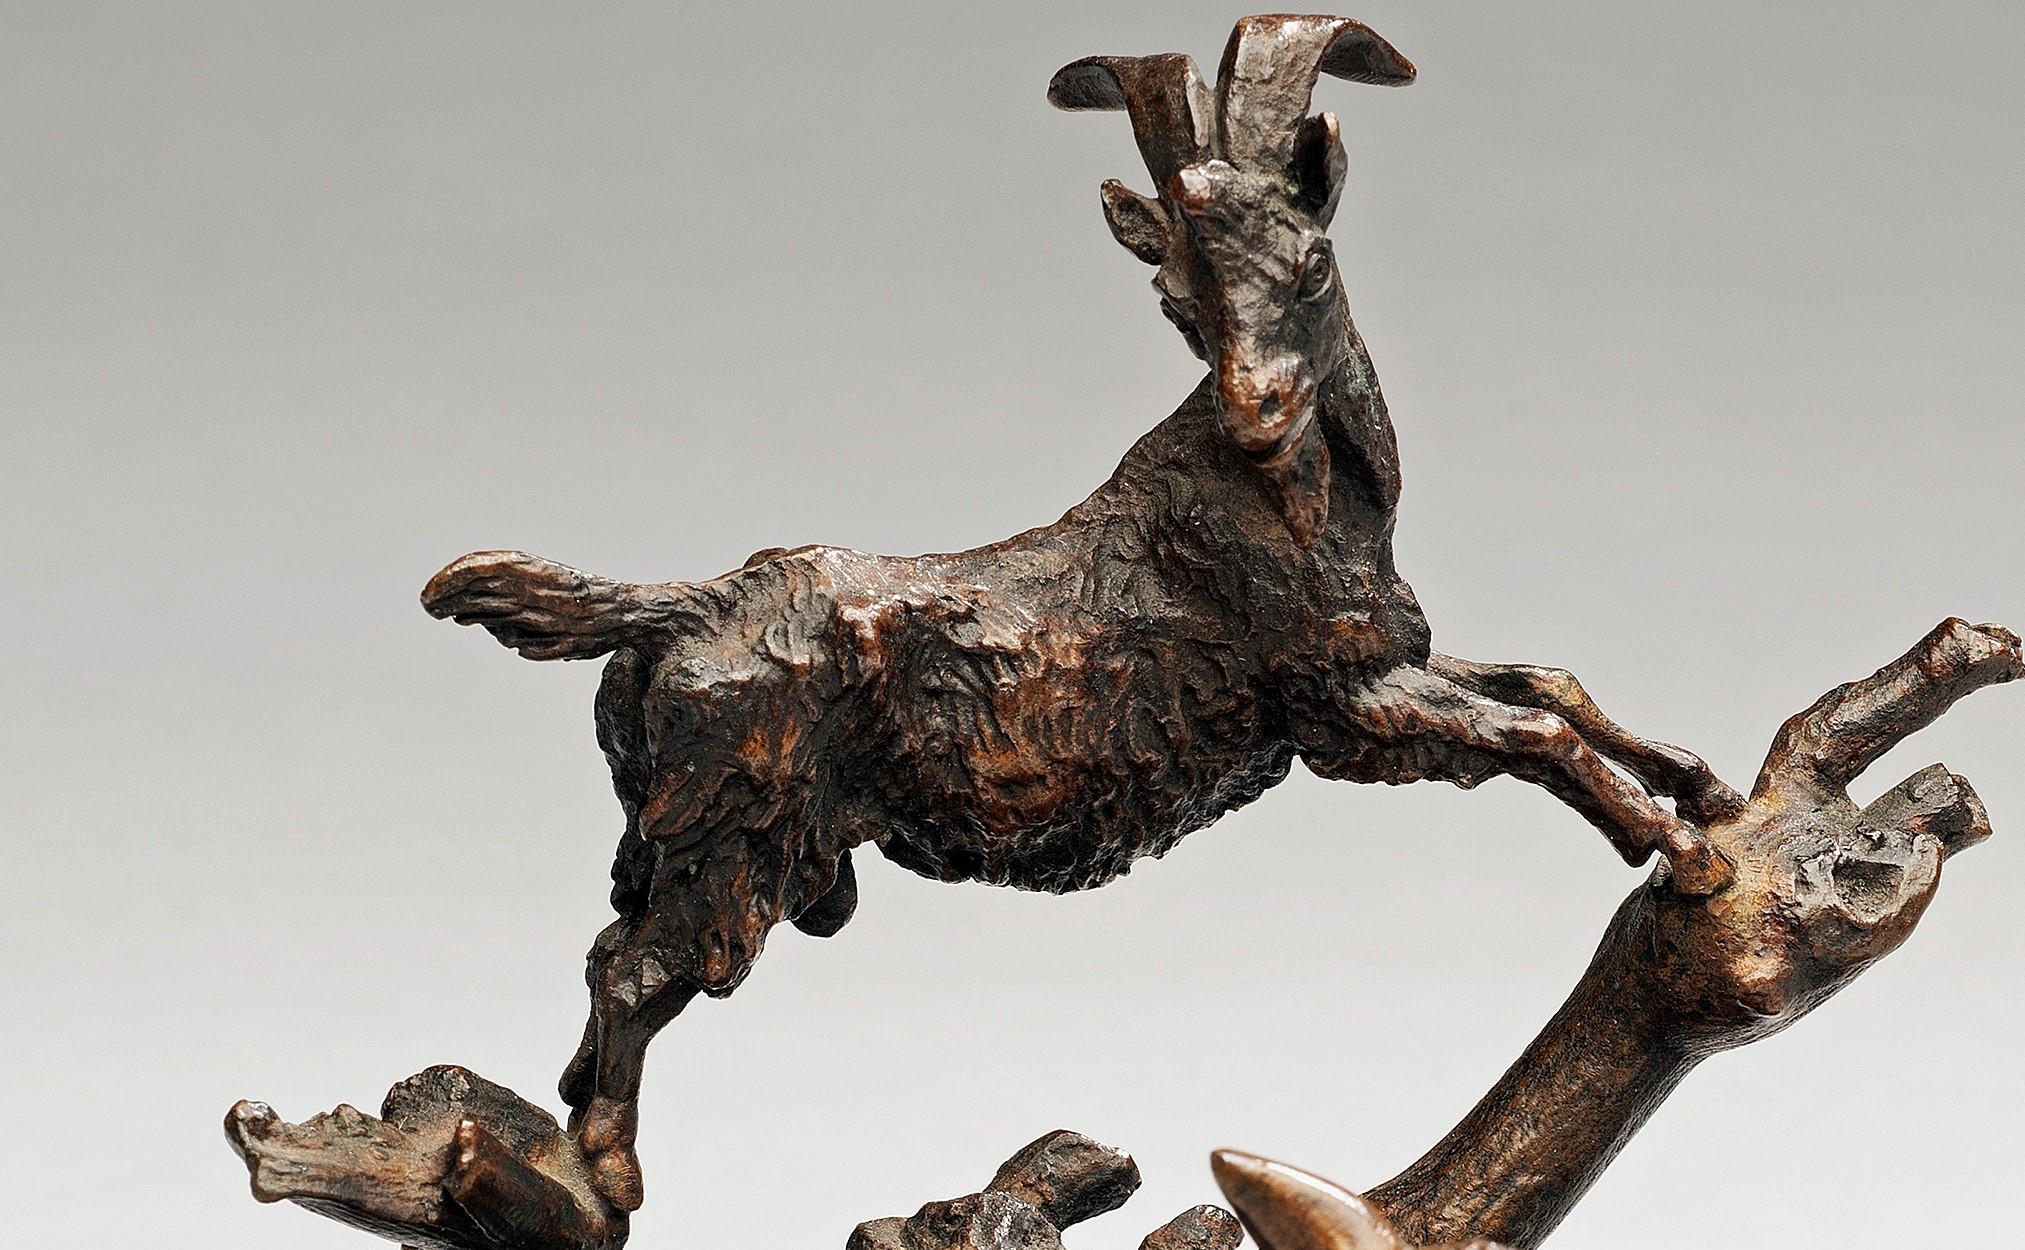 Antique Bronze Miniature Barnyard with a Bull, Sheep & Goat circa 1860, France - Romantic Sculpture by Christopher Fratin